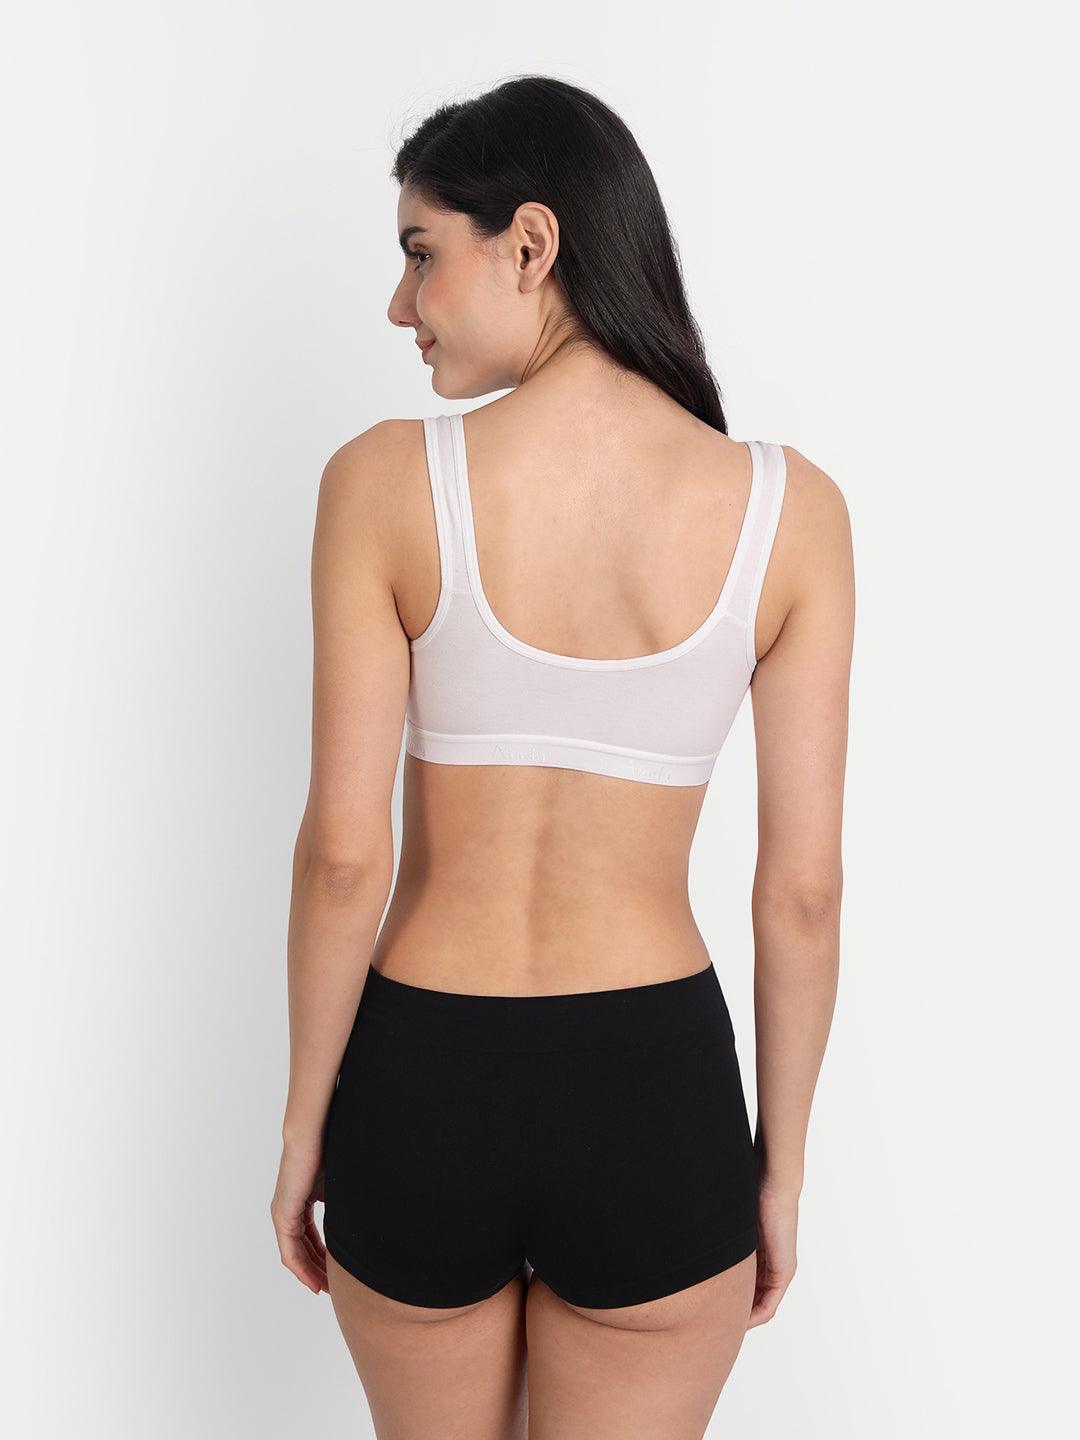 Women's Cotton Non-Padded Non-Wired Full Coverage Seamless Sports Bra